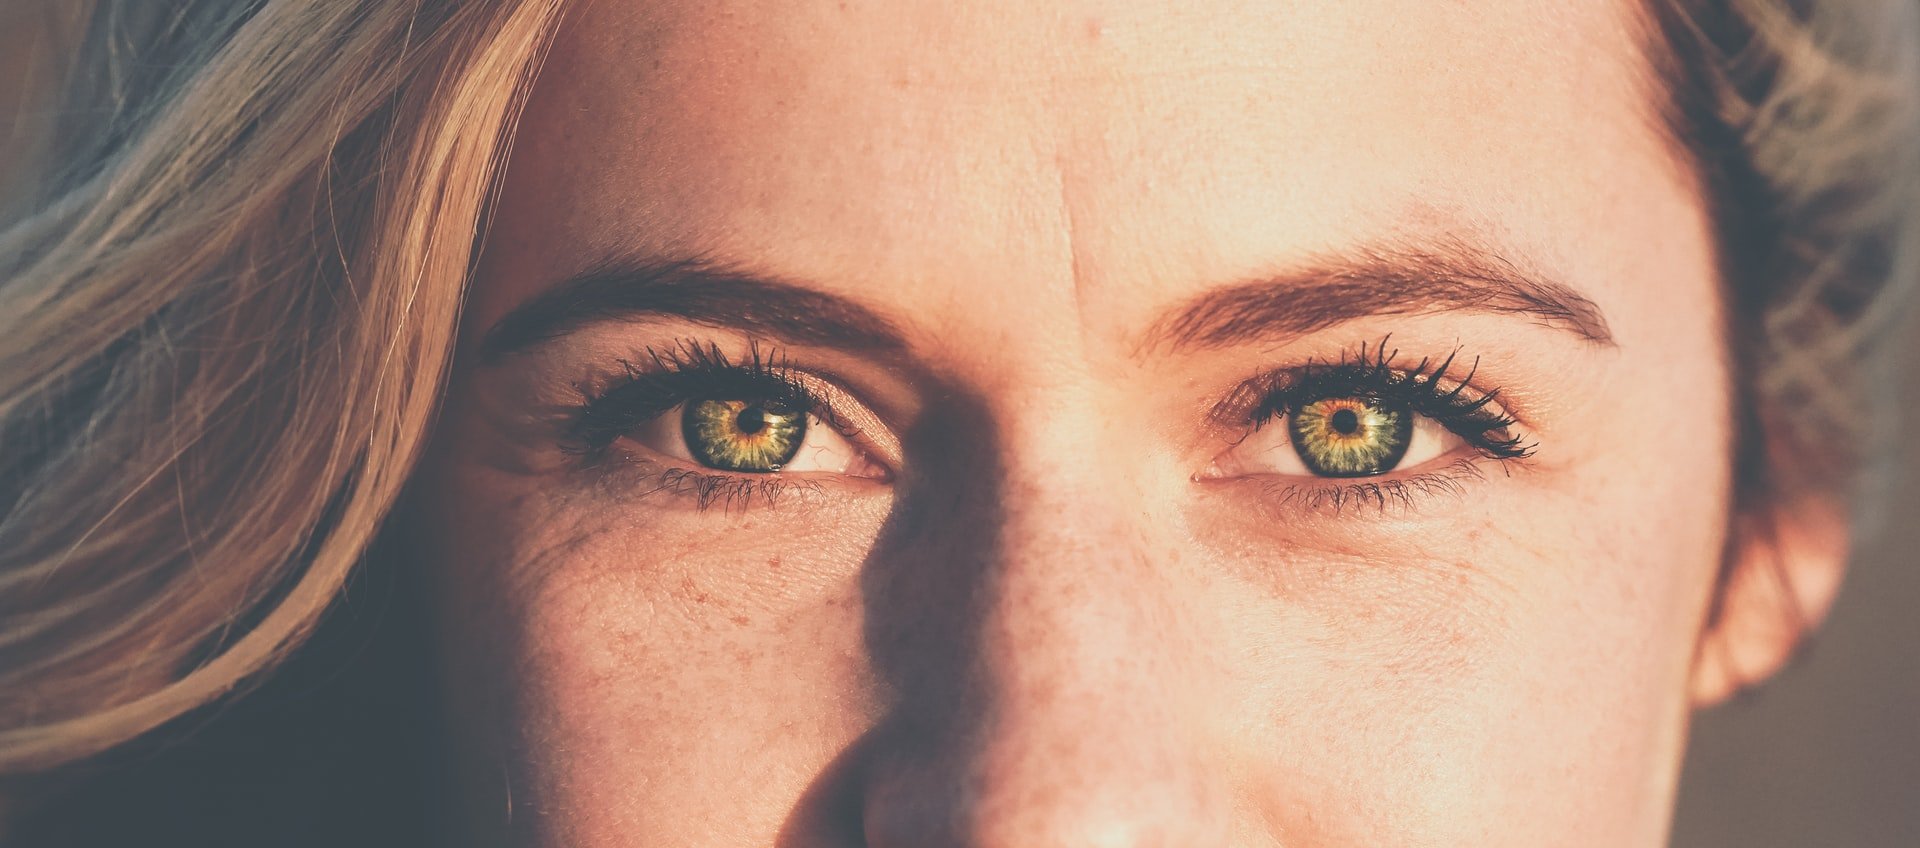 A close up of a woman's eyes. | Source: Unsplash